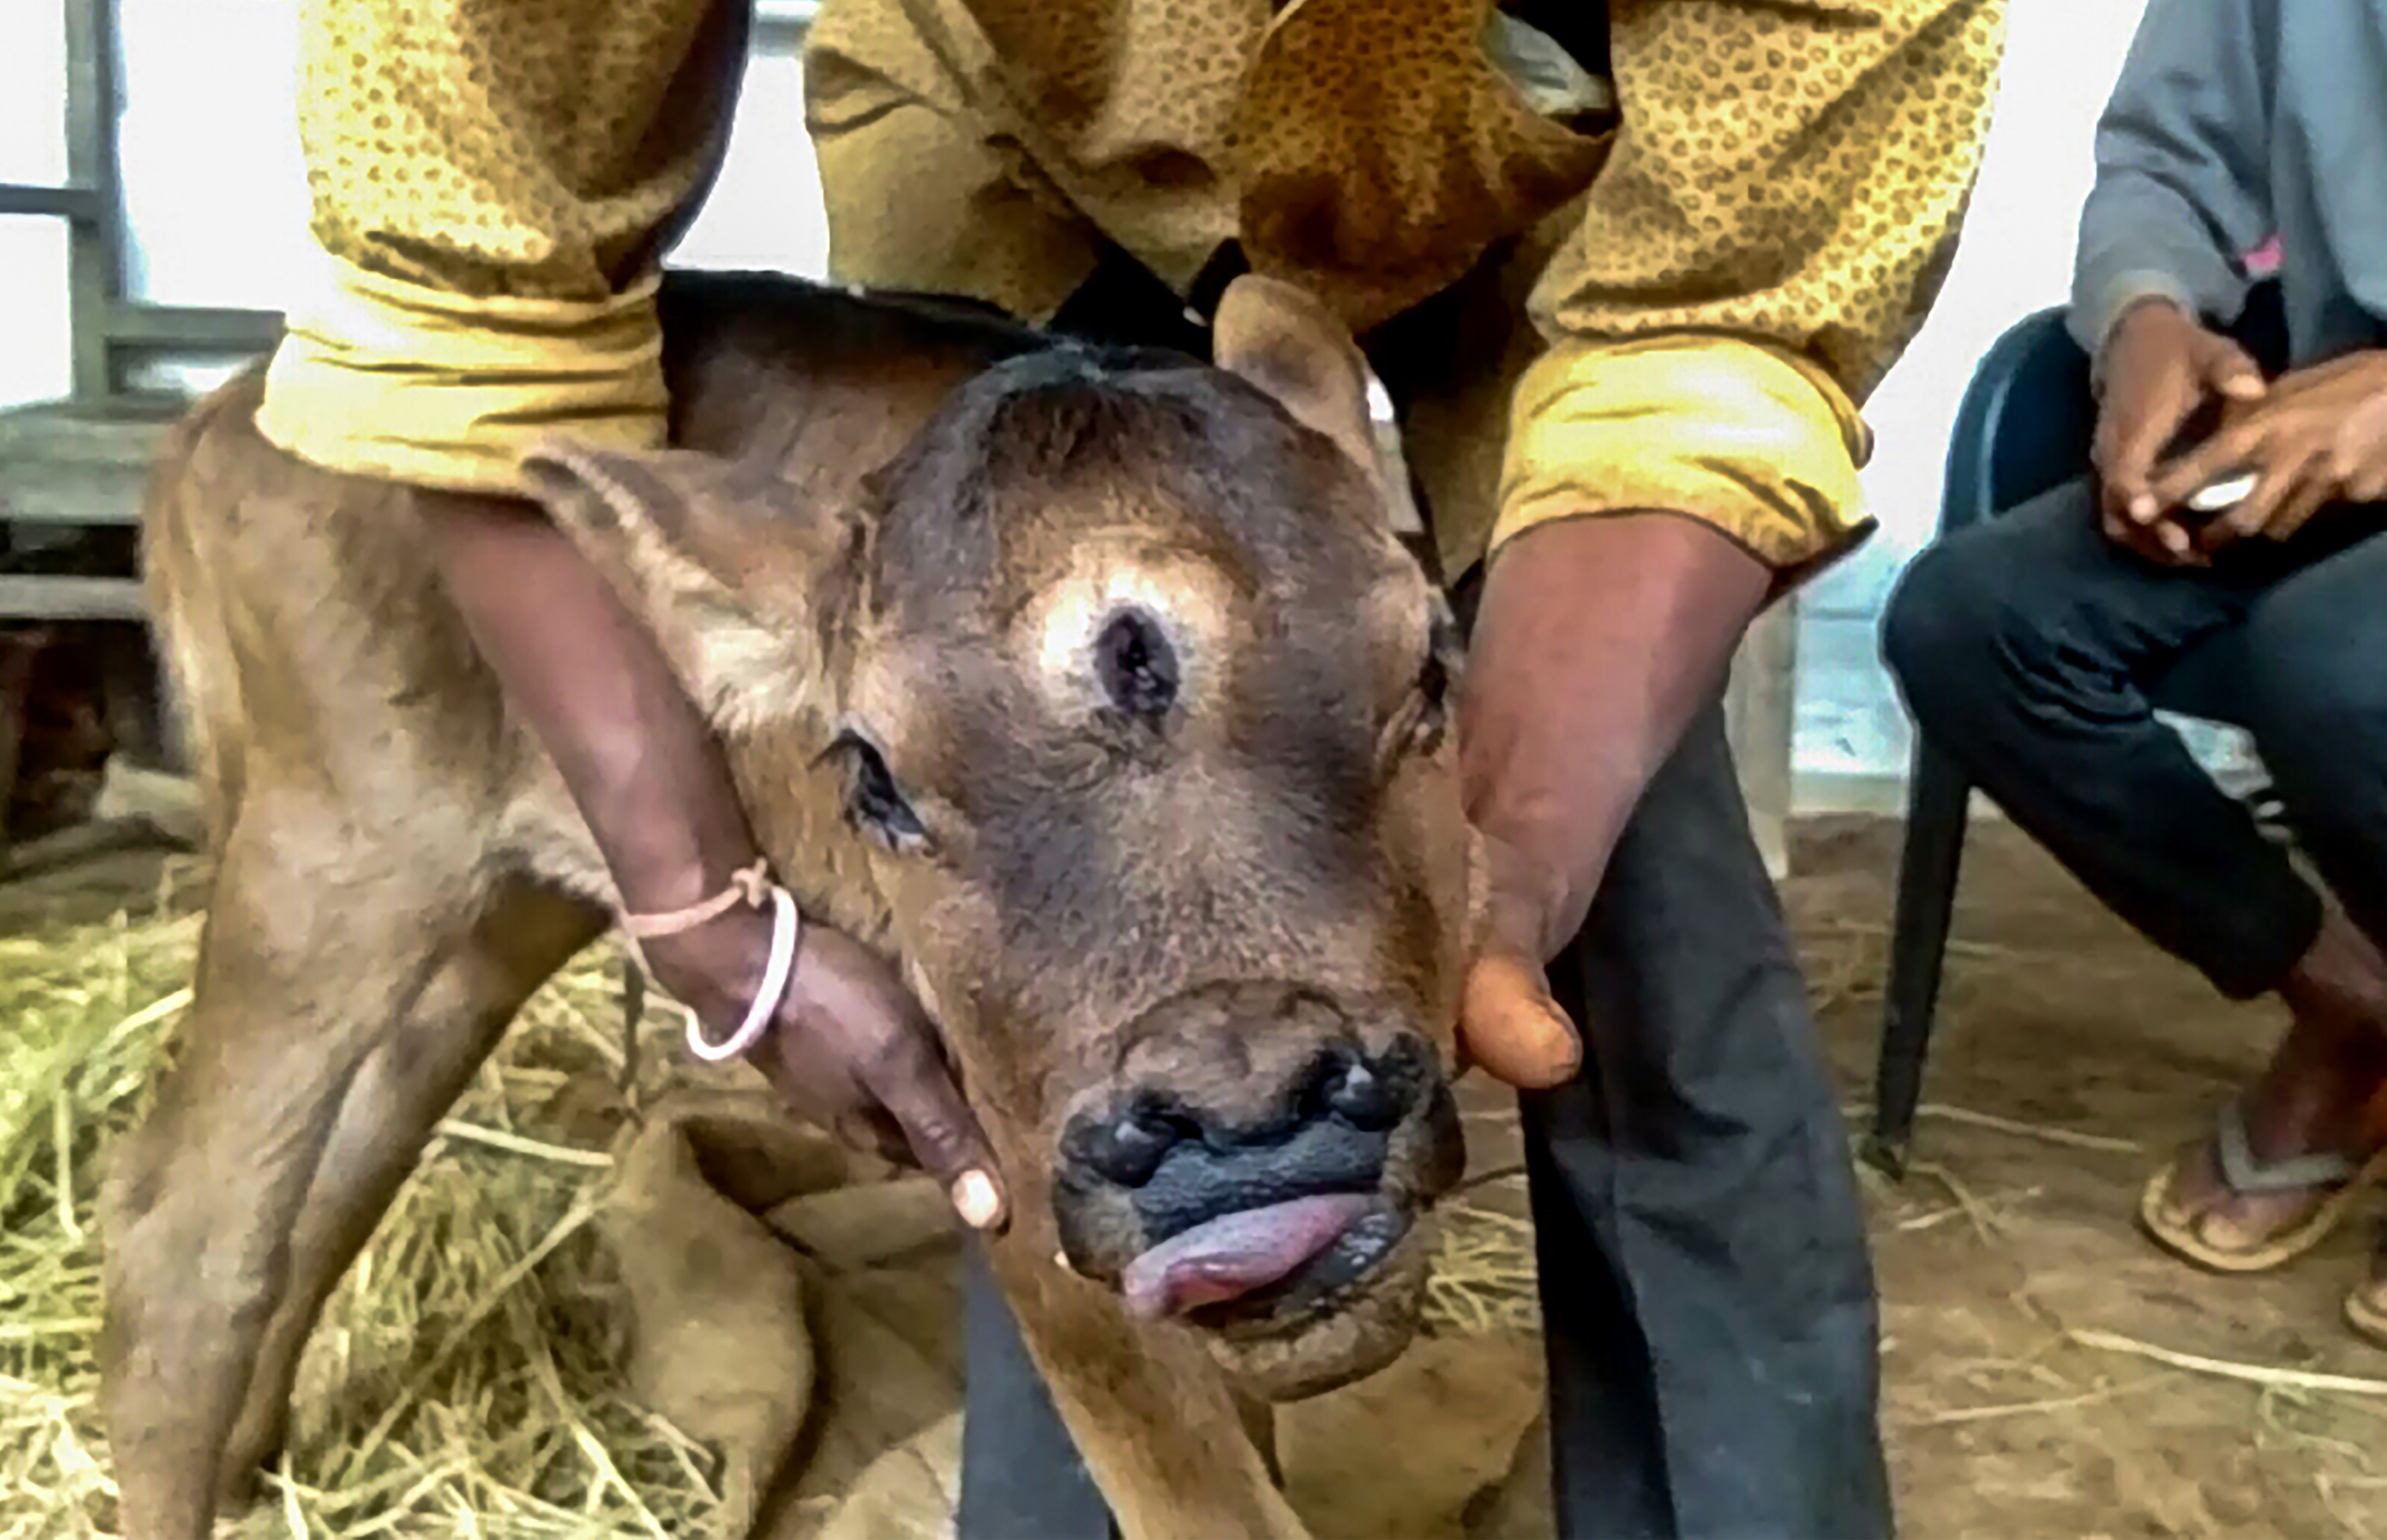 A rare calf with three eyes and four nostrils in a village in Chhattisgarh’s Rajnandgaon. The female calf was born to a cow owned by farmer Hemant Chandel, a resident of Nawagaon Lodhi village, on Jan. 13. (PTI Photo)